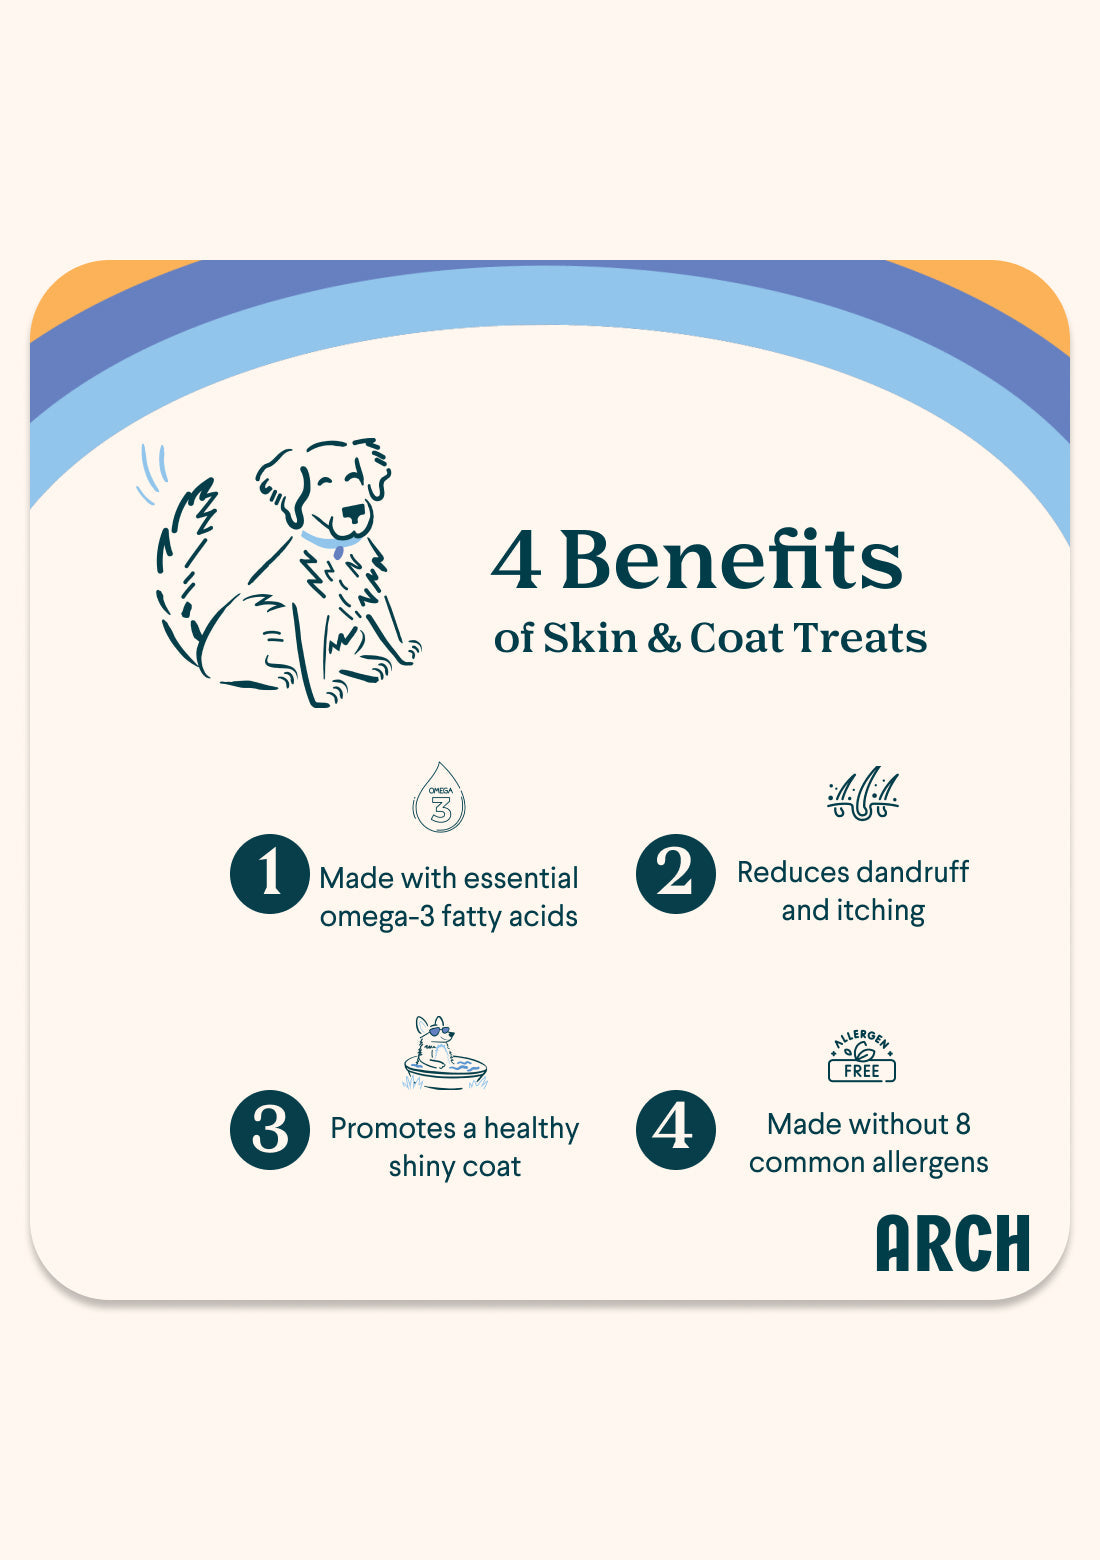 4 benefits listed for Arch's skin and coat treats for dogs